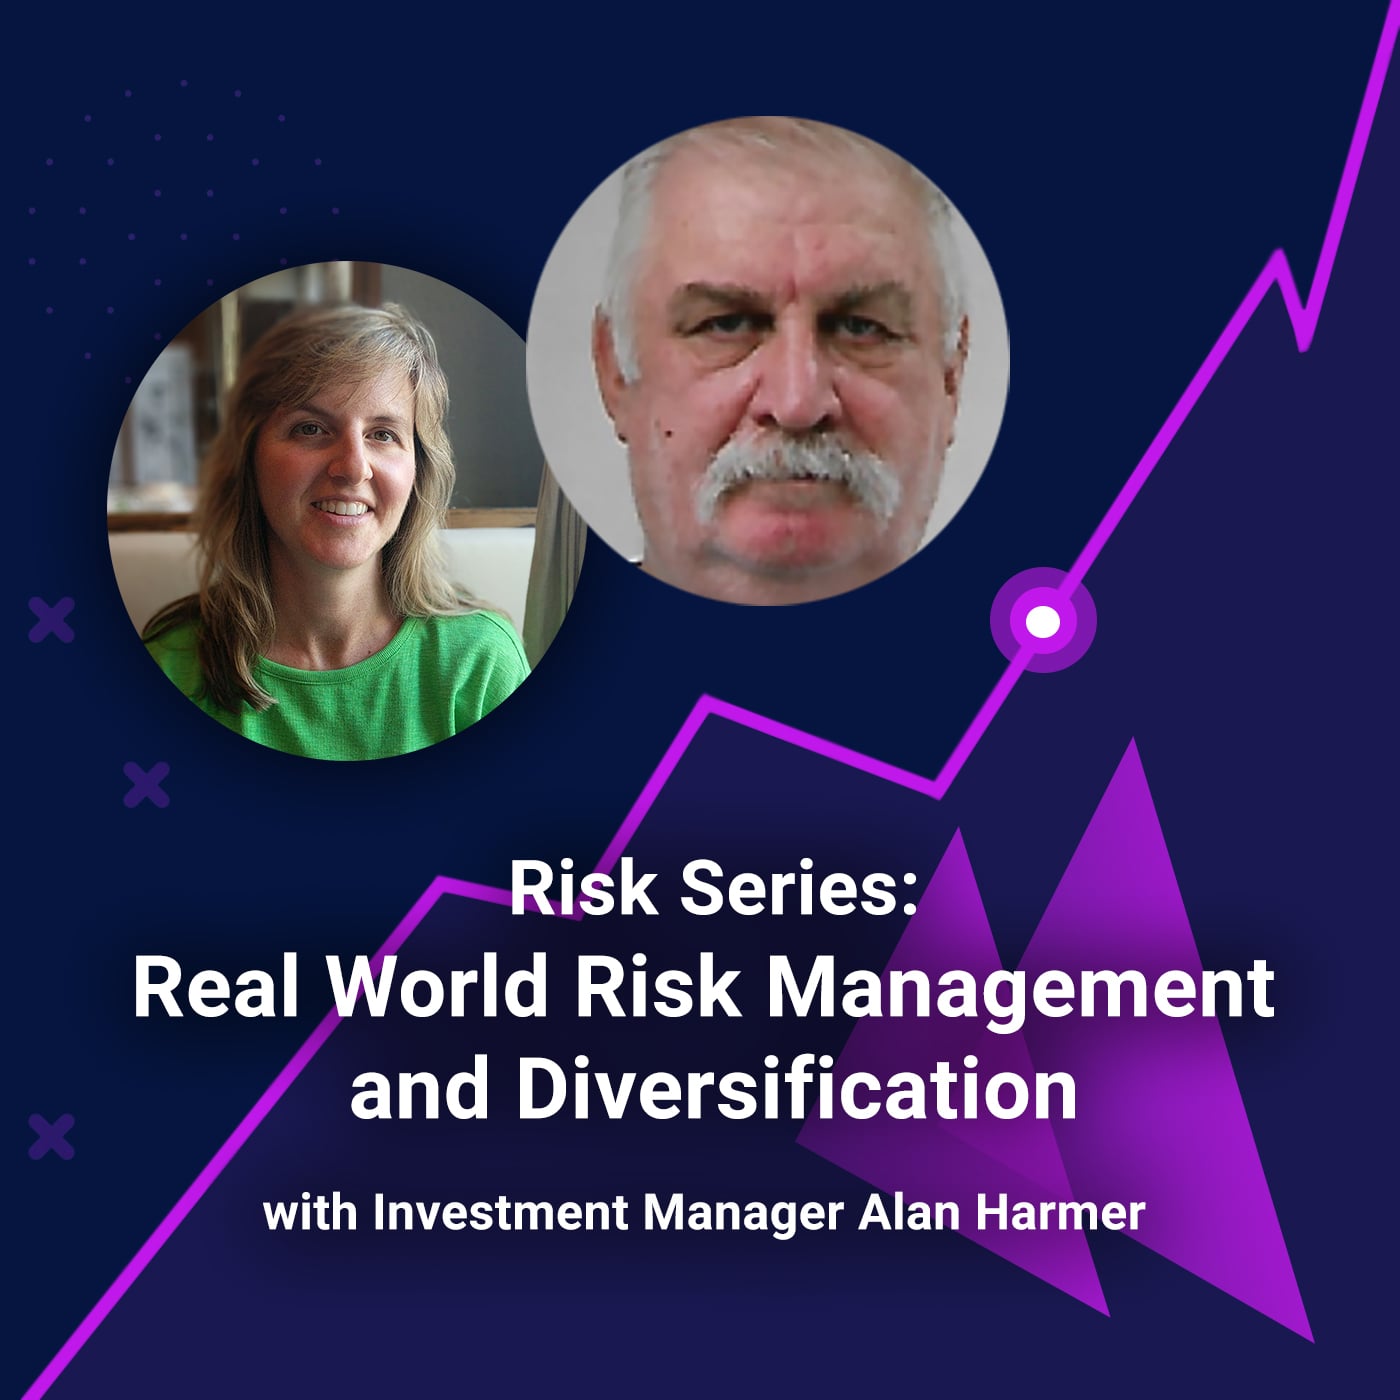 Risk Series - Real World Risk Management and Diversification with Investment Manager Alan Harmer